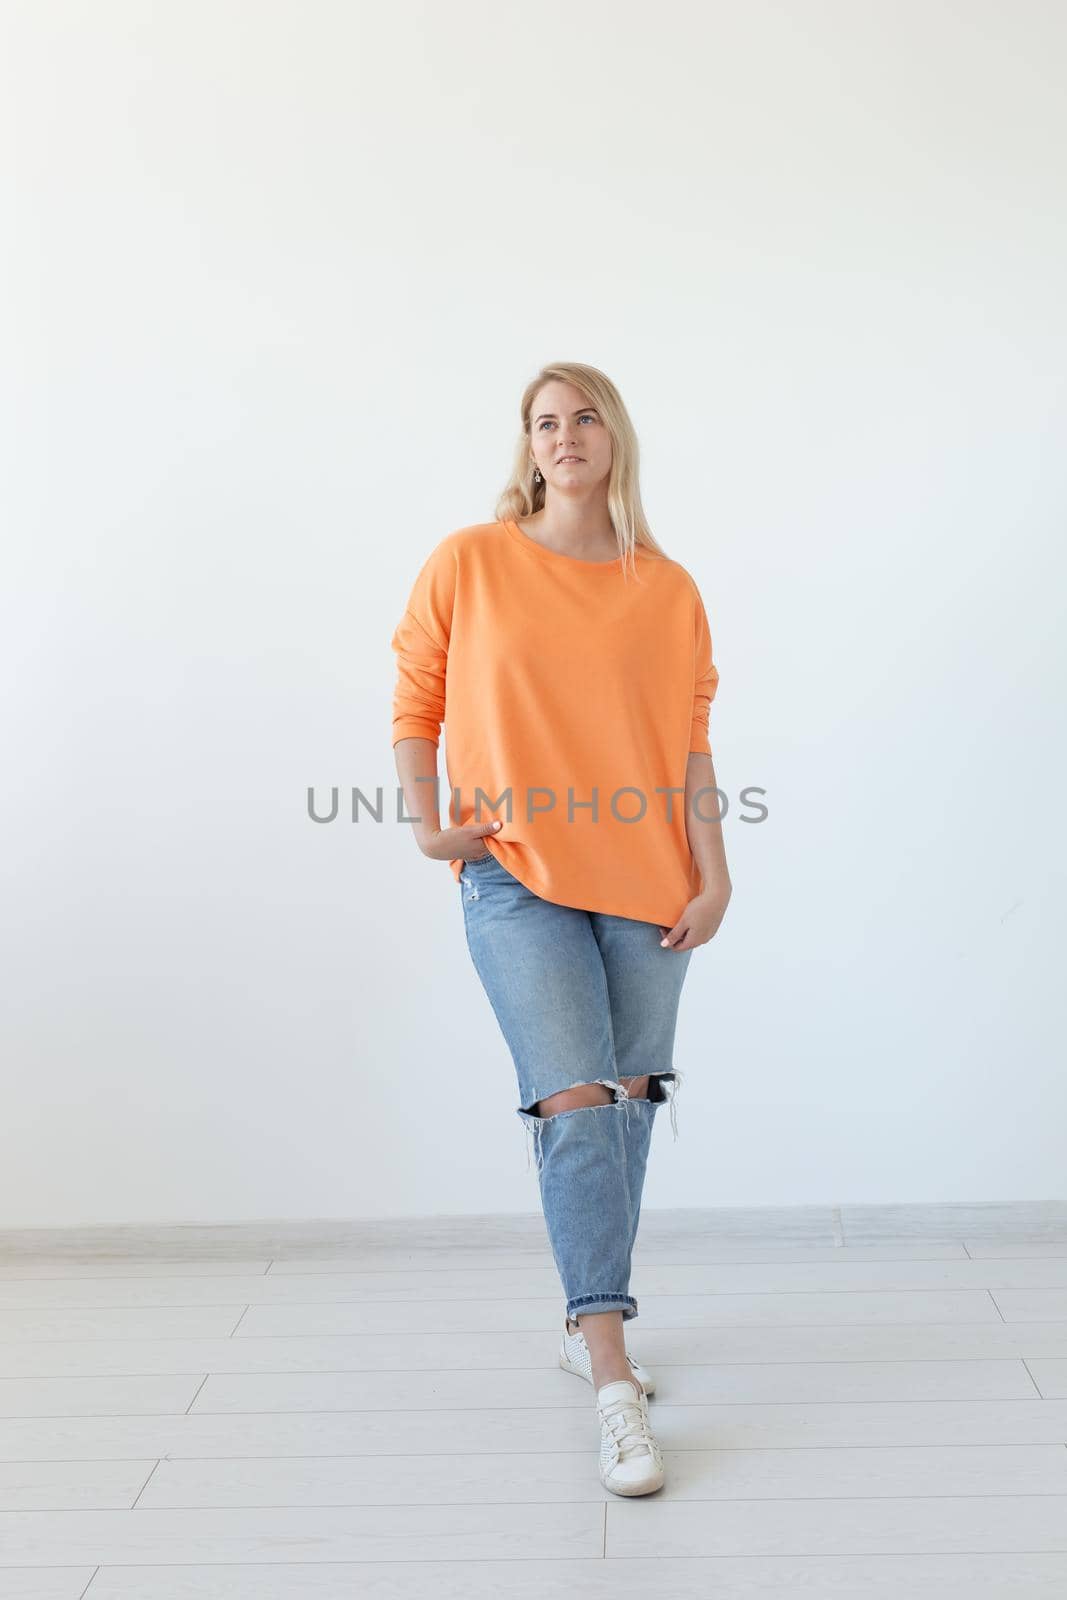 Portrait of pretty young woman in casual clothes posing on a white background. Space for reference links or advertising.